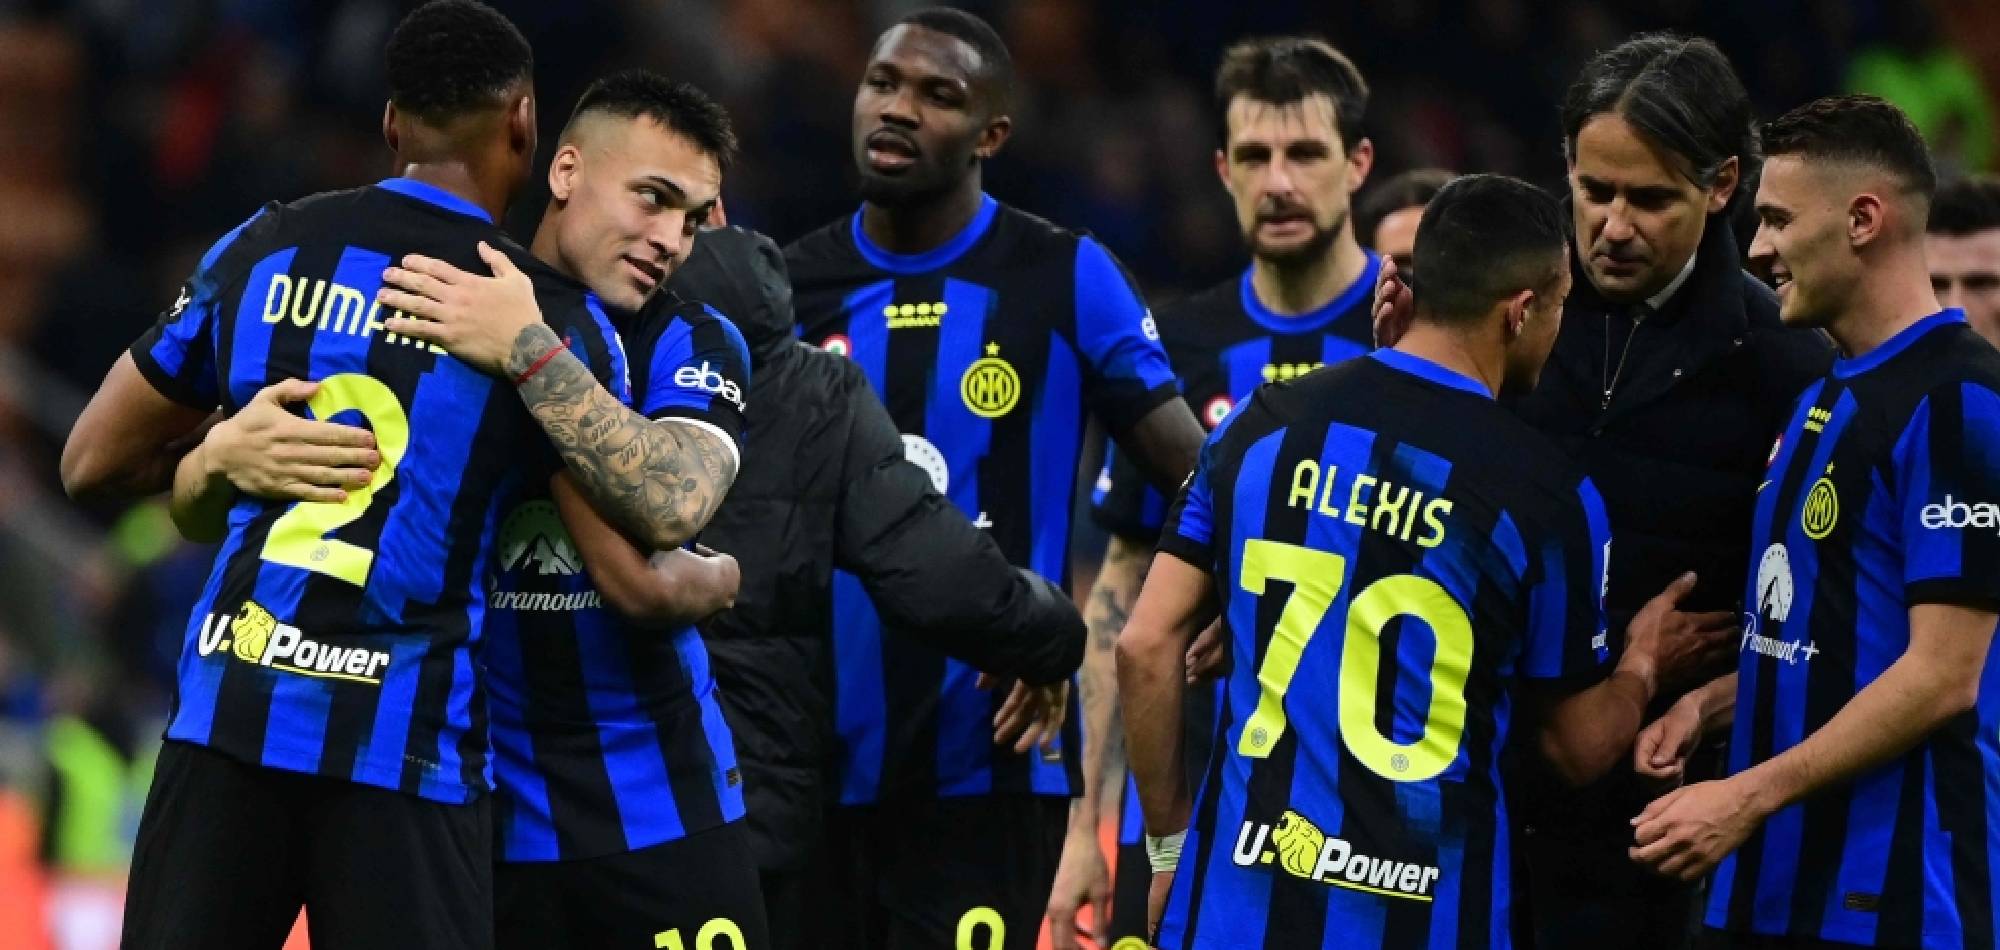 Inter beat Empoli to close in on Serie A title